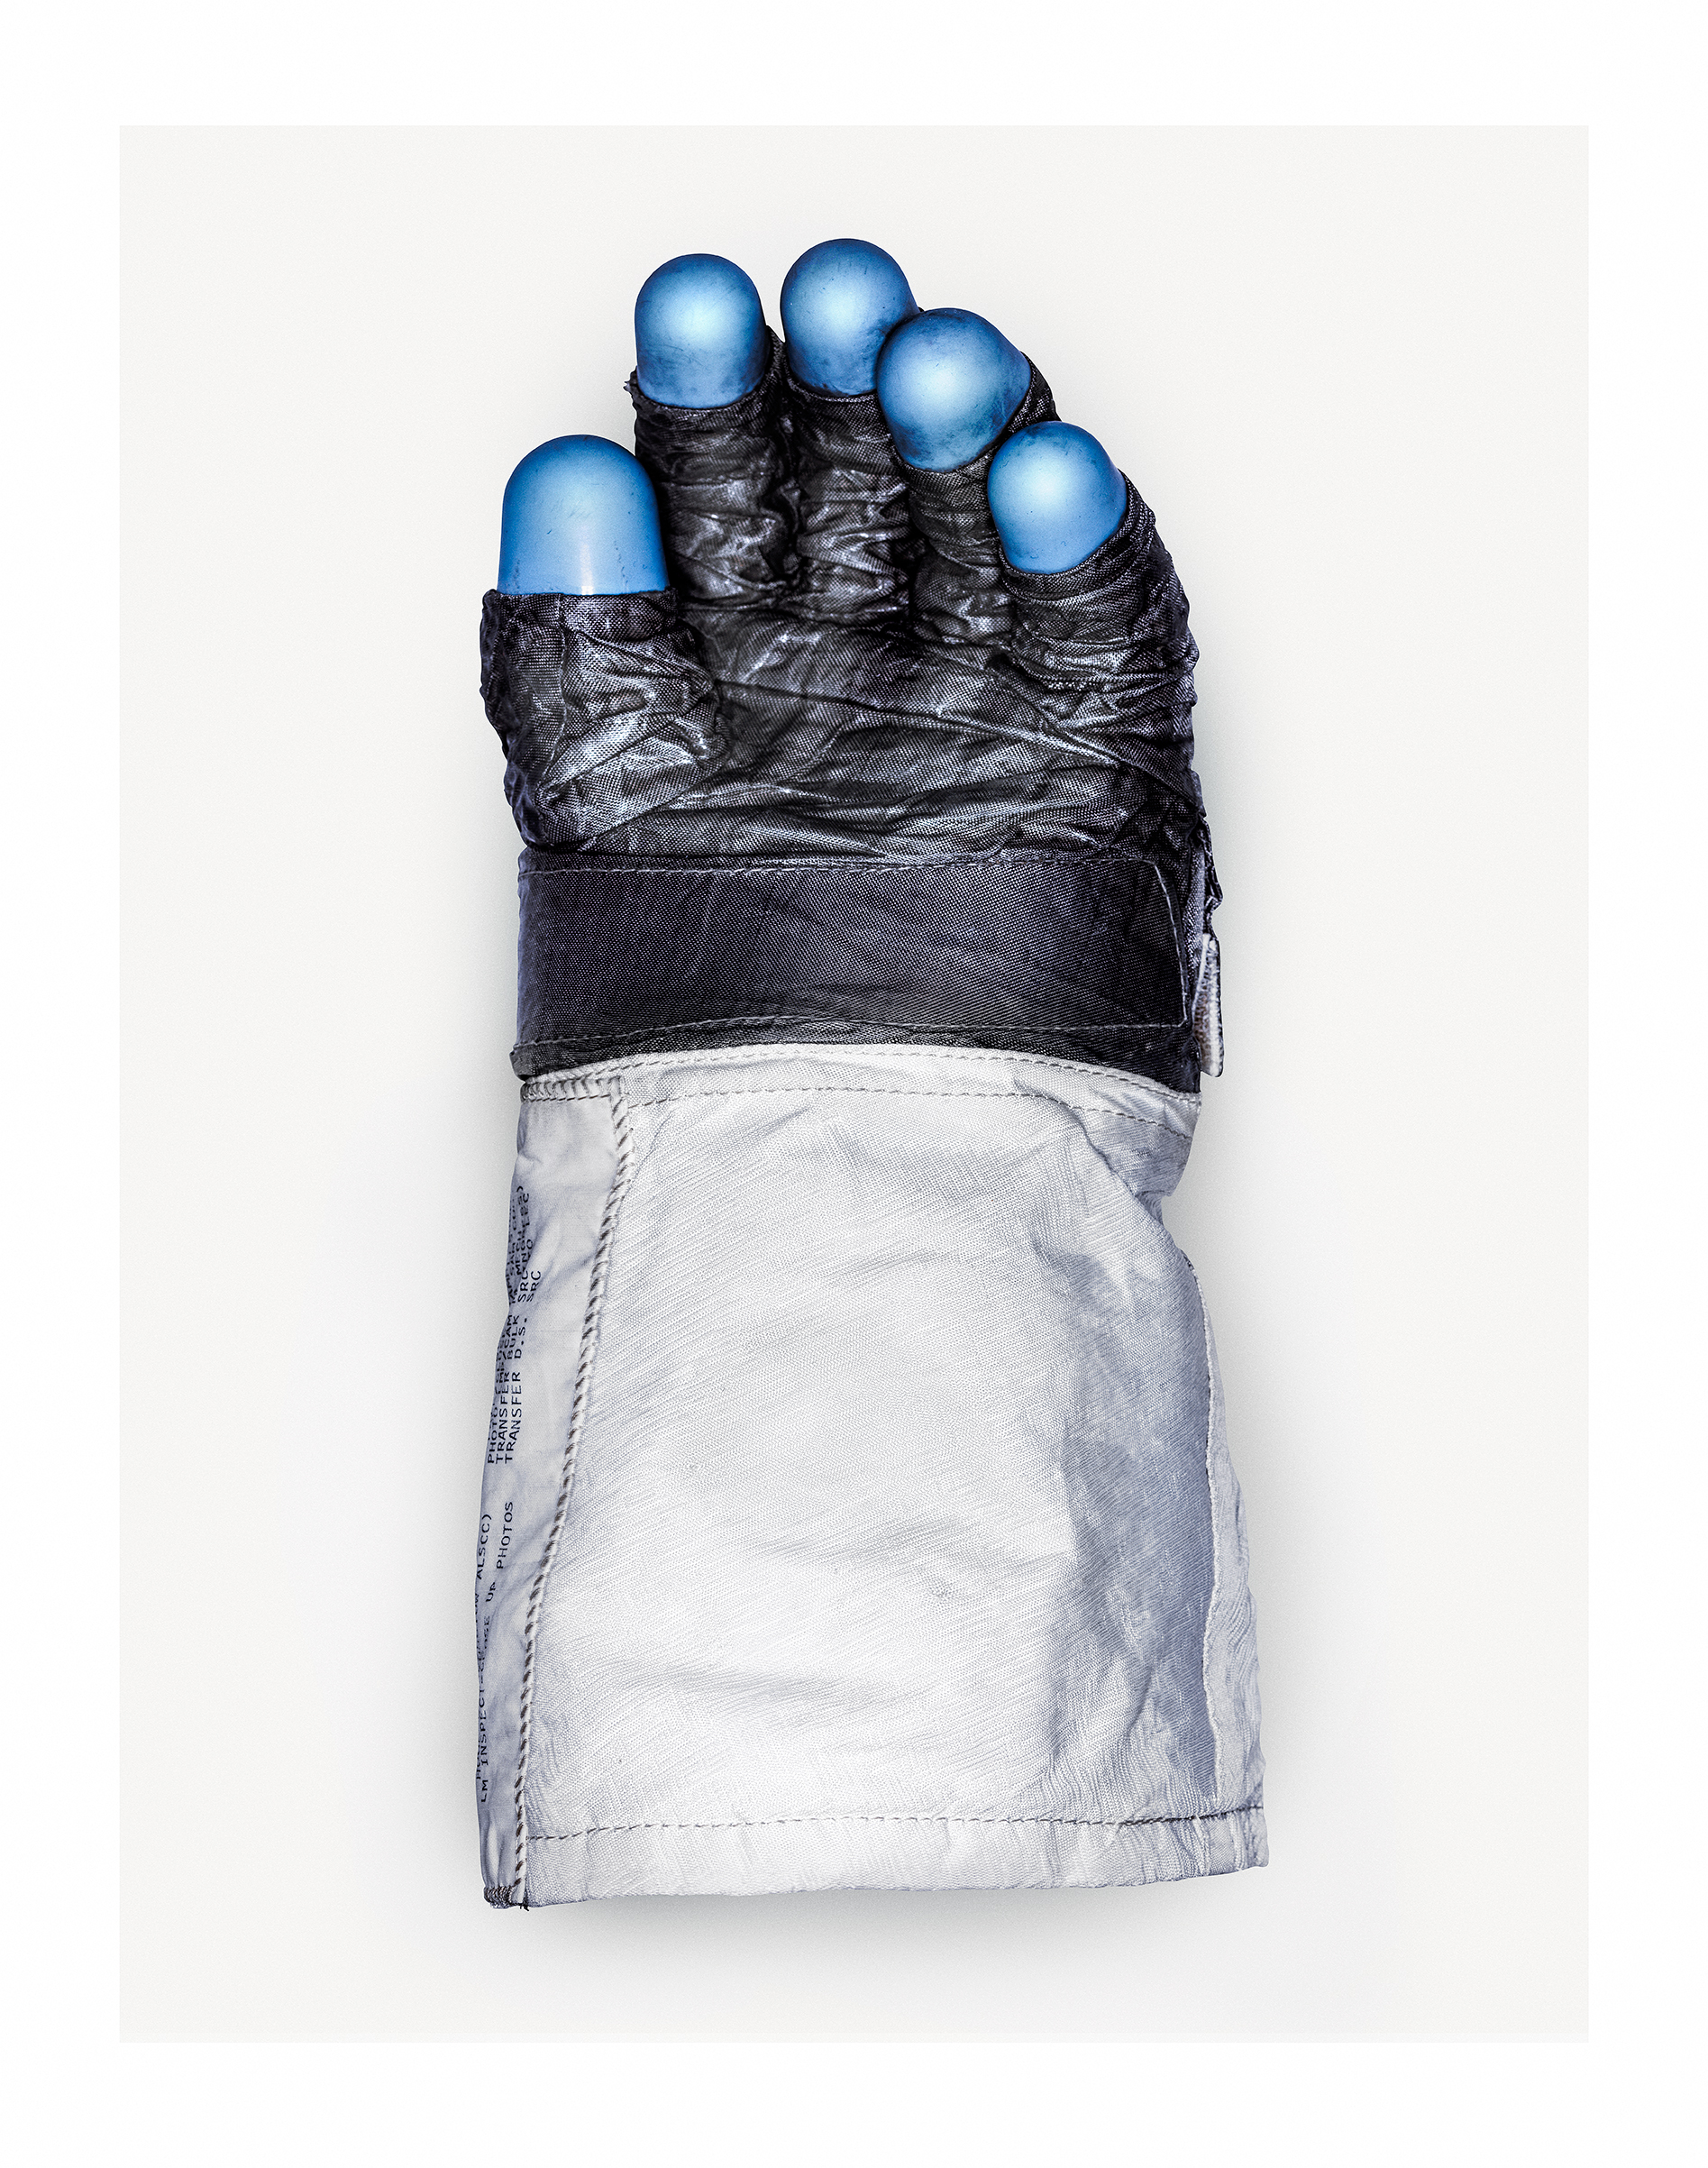 Neil Armstrong’s spacesuit glove in the Smithsonian Institution lab where it is being restored